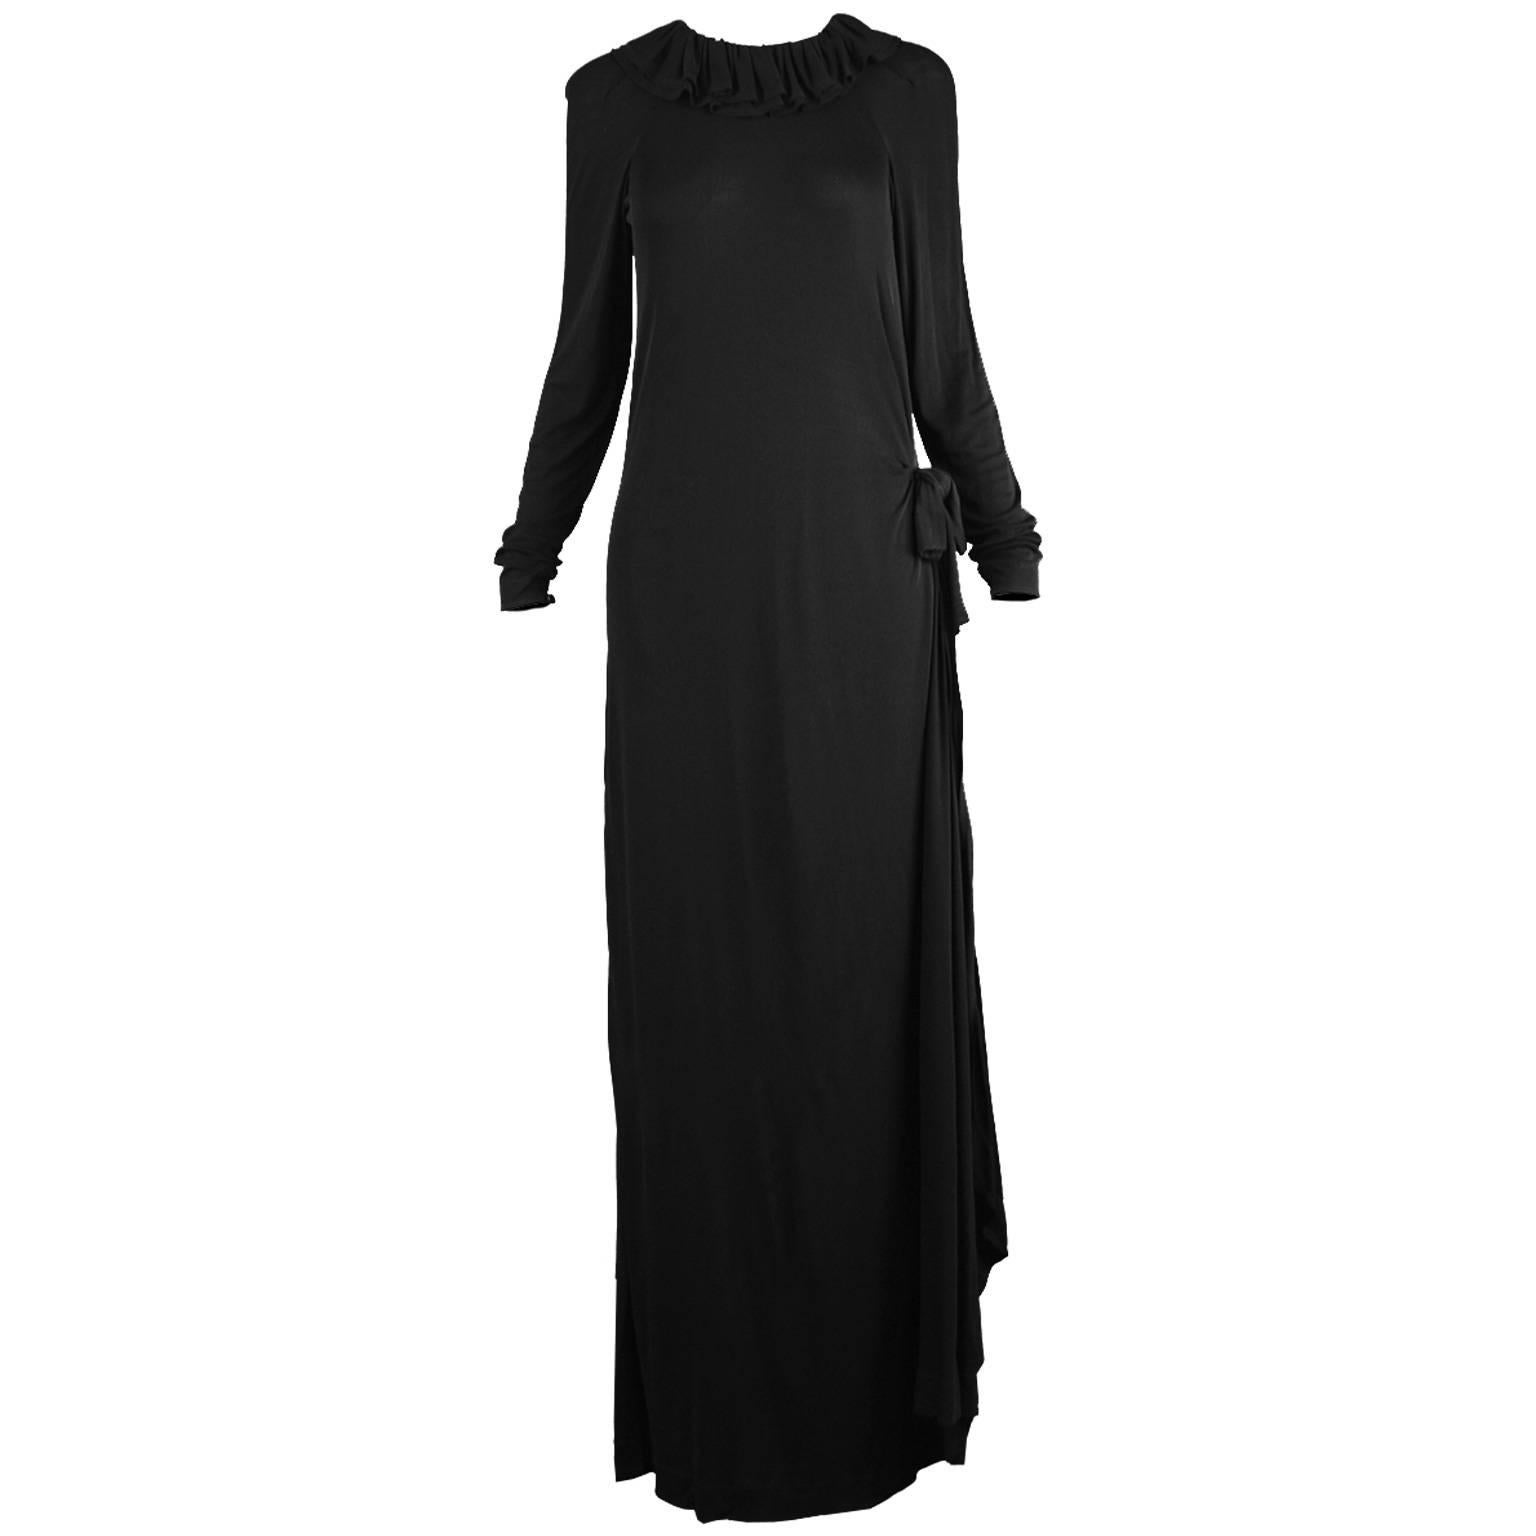 Jean Muir Black Draped Rayon Jersey Vintage Dress with Side Train, 1970s For Sale